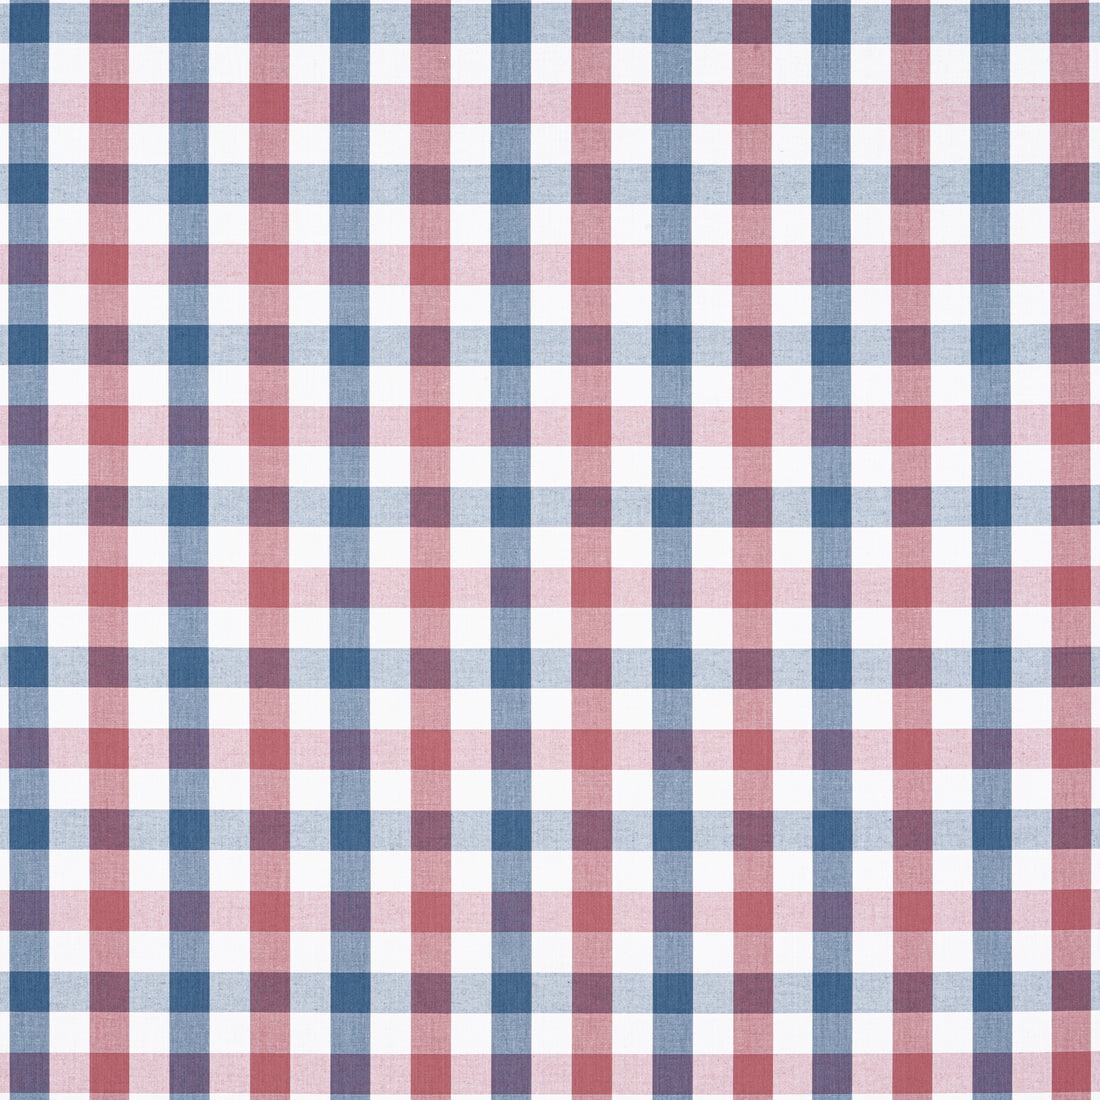 Saybrook Check fabric in blue and red color - pattern number AW15153 - by Anna French in the Antilles collection